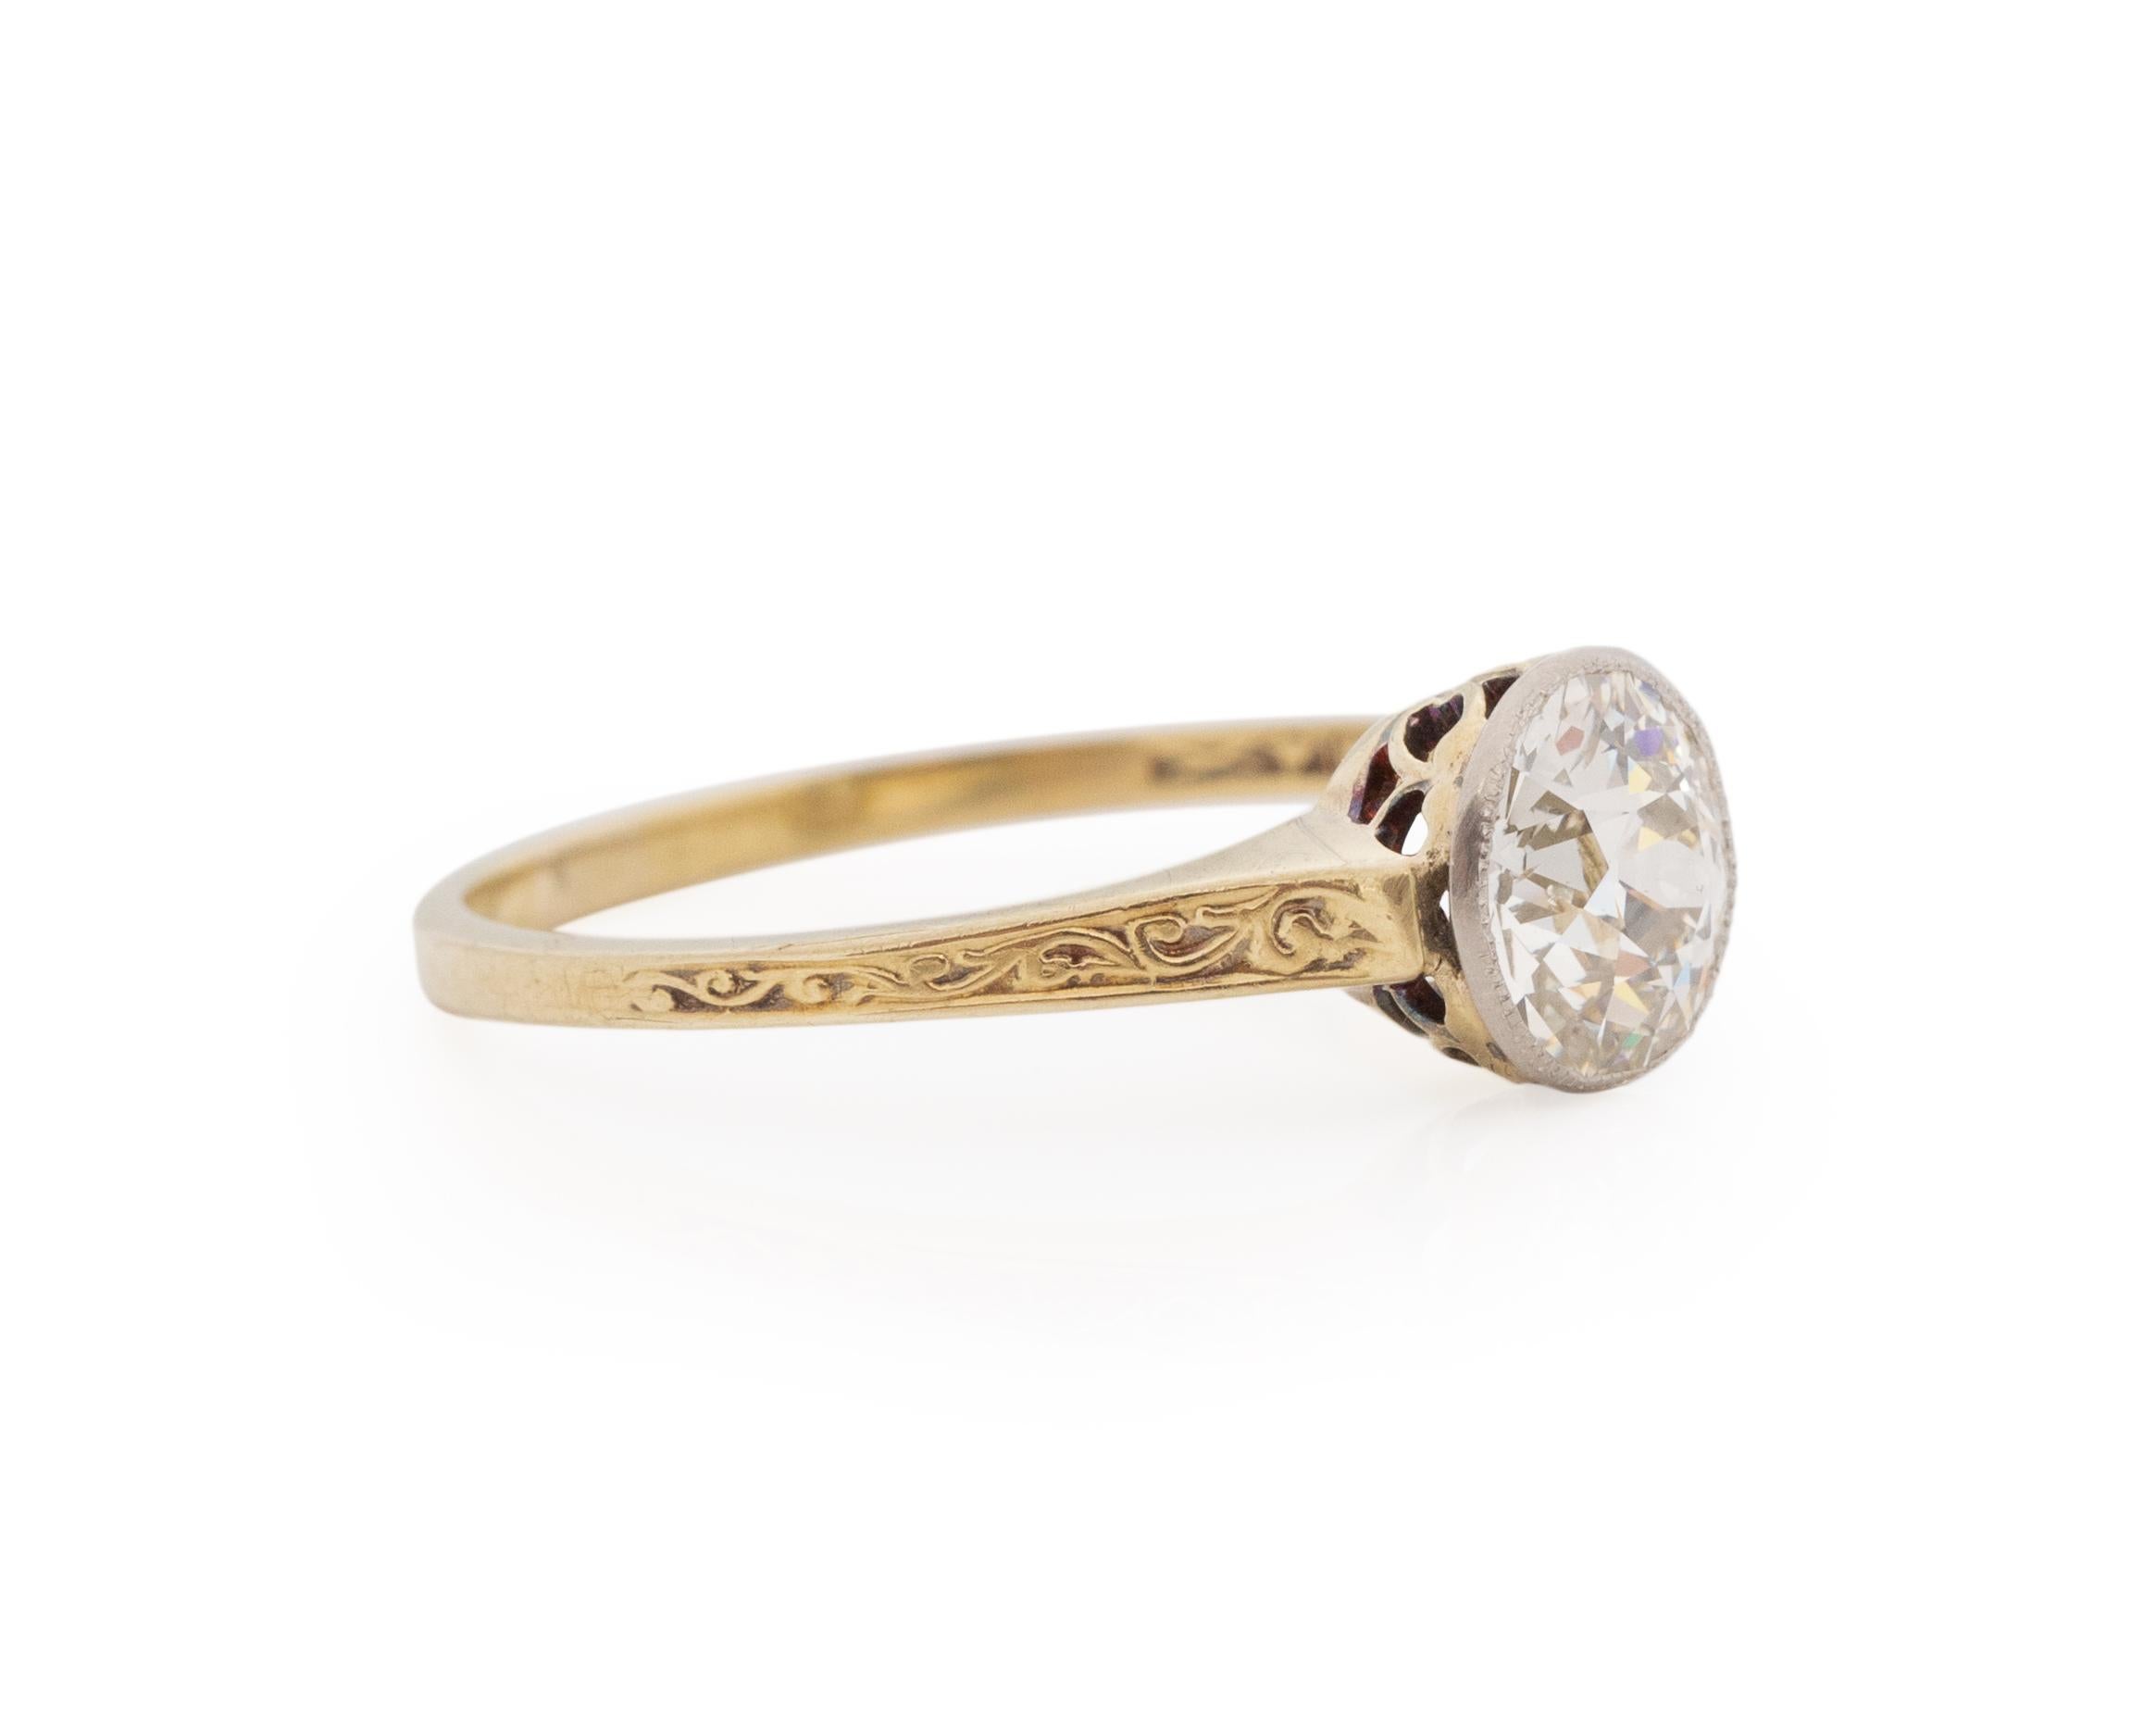 Ring Size: 6.75
Metal Type: 14K Yellow Gold [Hallmarked, and Tested]
Weight: 2.7 grams

Center Diamond Details:
GIA REPORT #: 6421399083
Weight: 1.03ct
Cut: Old European brilliant
Color: K
Clarity: VS2
Measurements: 6.54mm x 6.24mm x 3.96mm

Finger